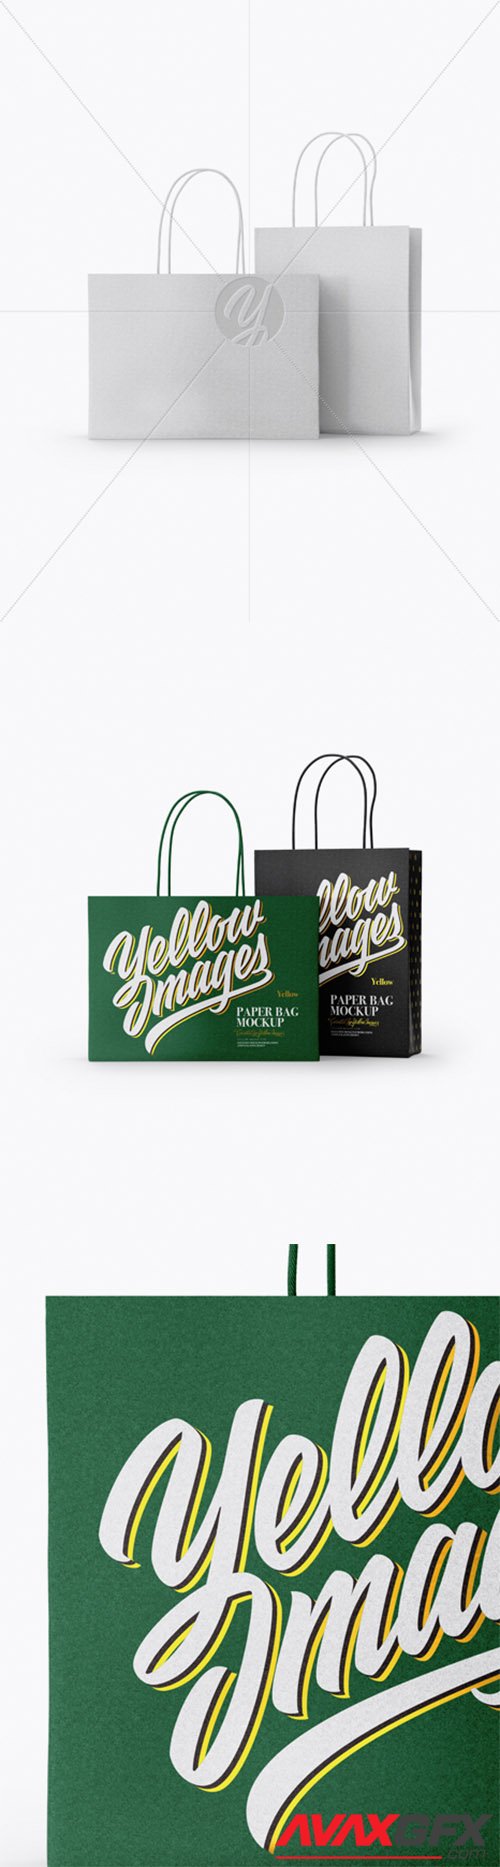 Two Paper Bags Mockup - Half Side View 27917